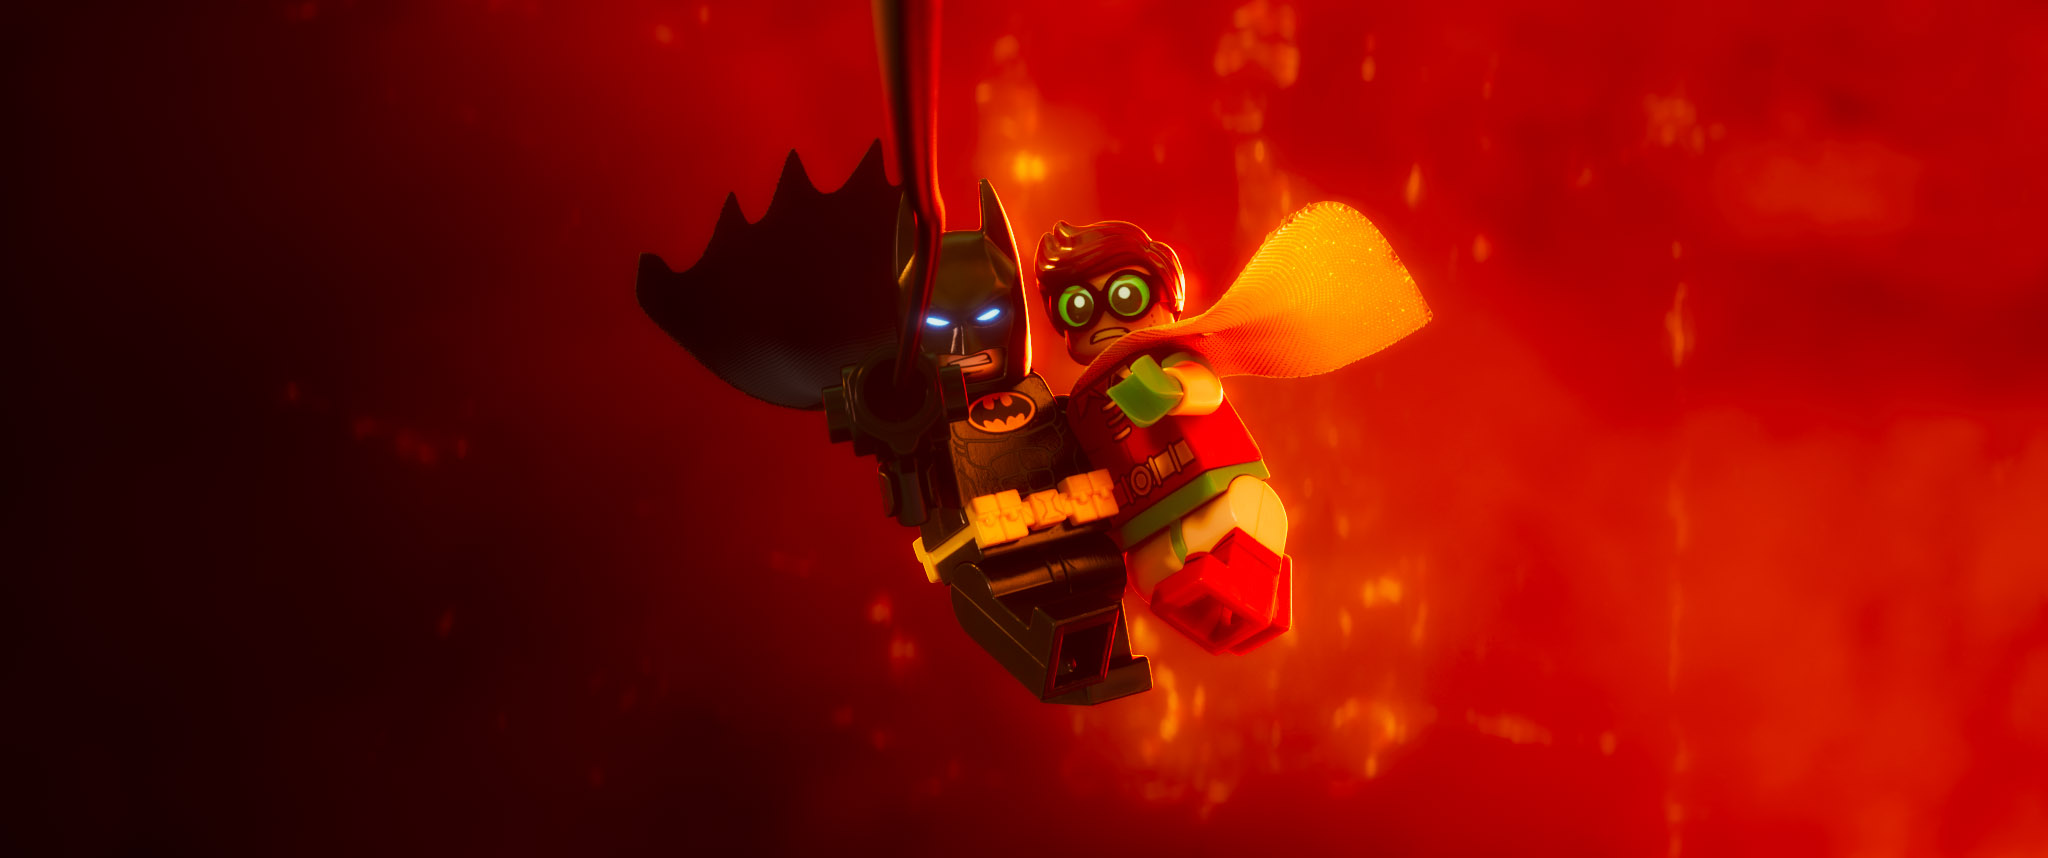 Review: Like Its Star, The LEGO Batman Movie Tries Way Too Hard To Be Cool